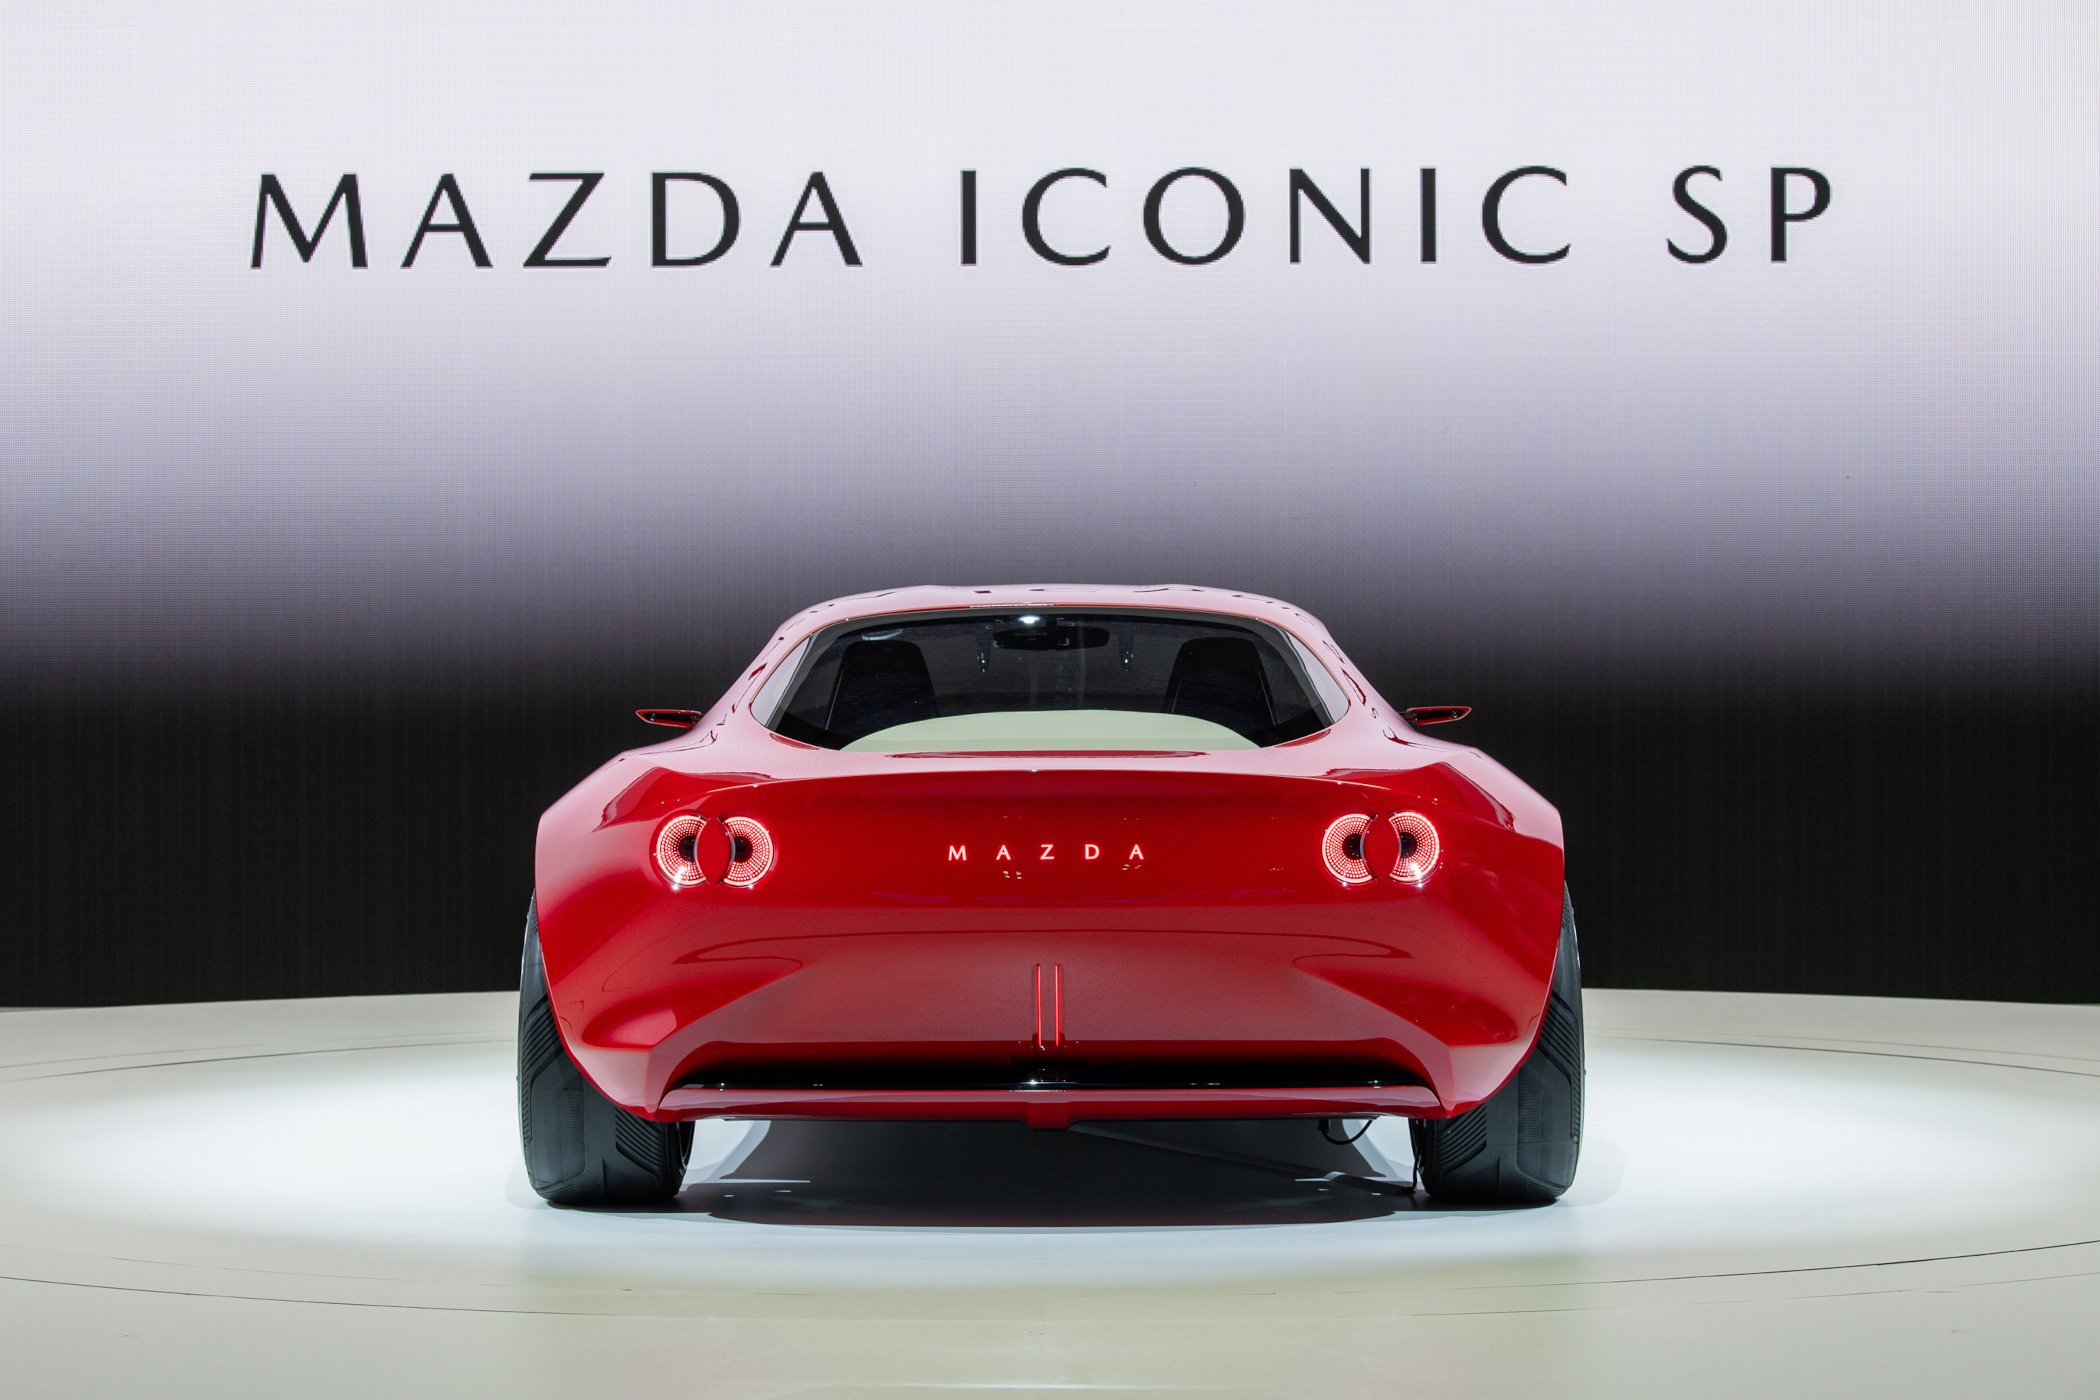 2023 Mazda Iconic SP - Rotary sports coupe - 2